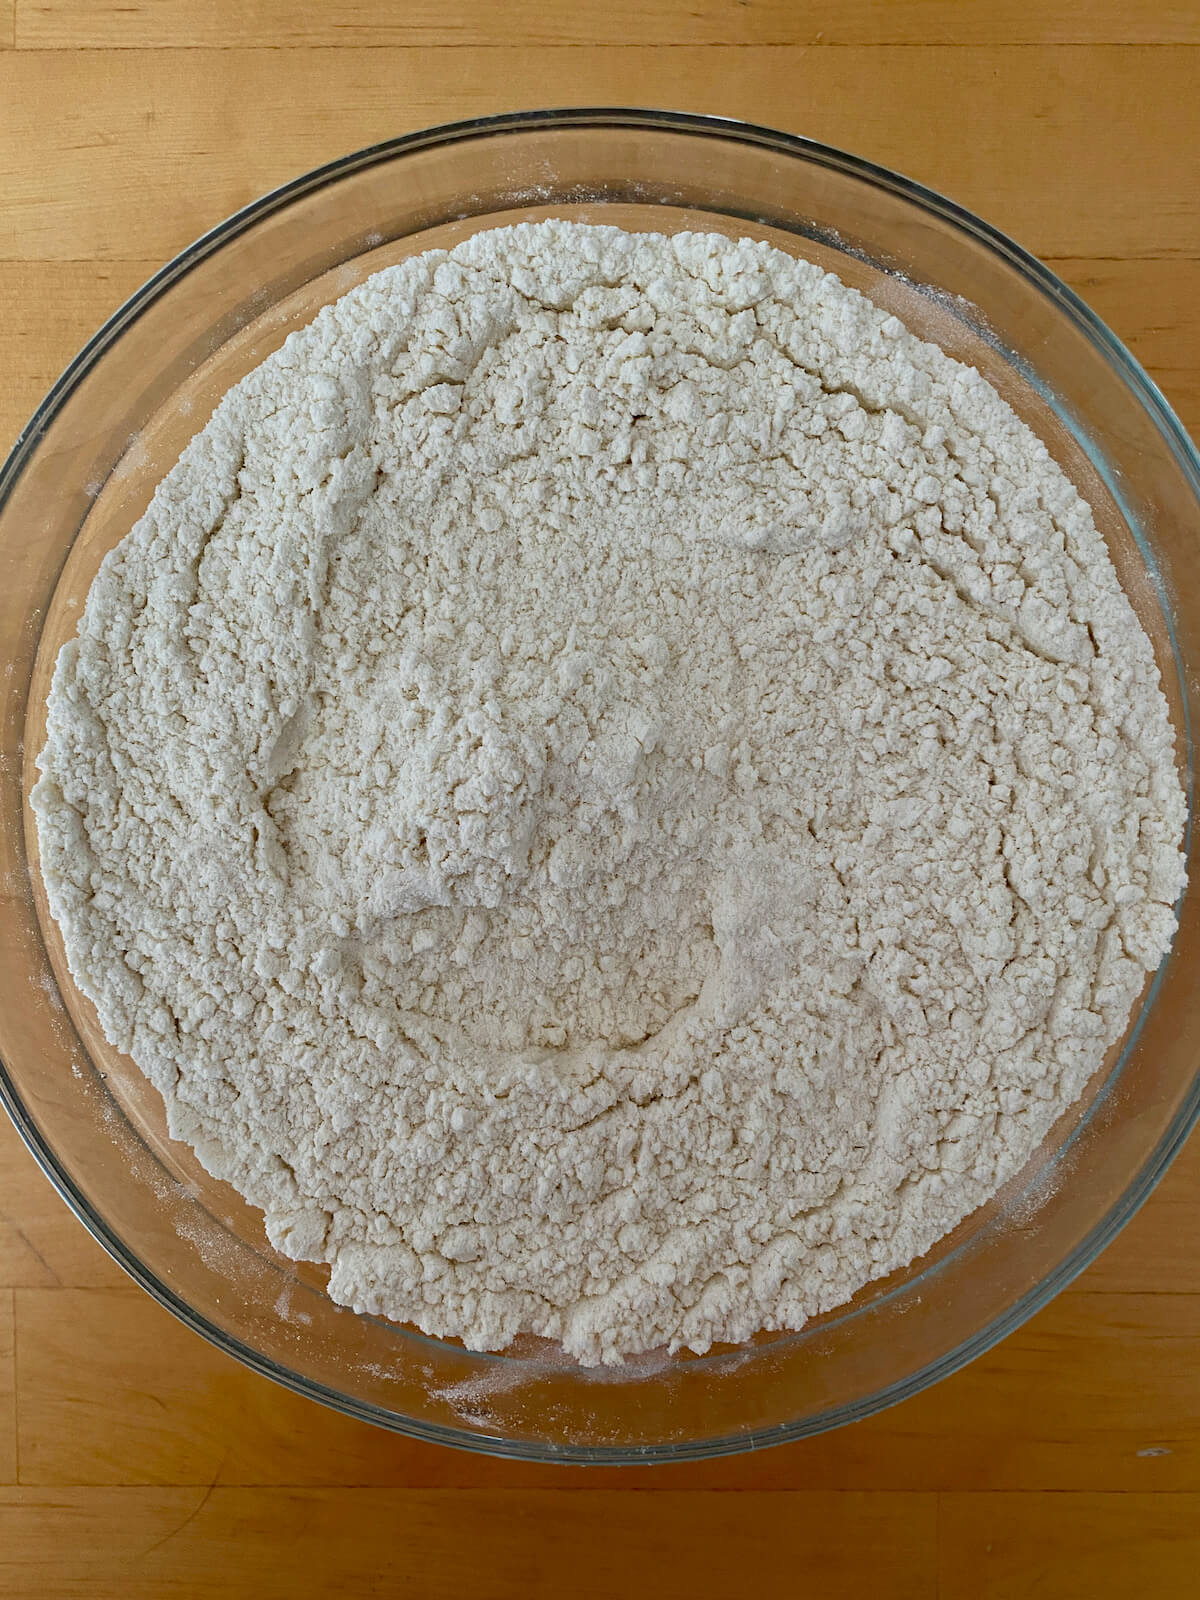 The dry ingredients in a glass mixing bowl.